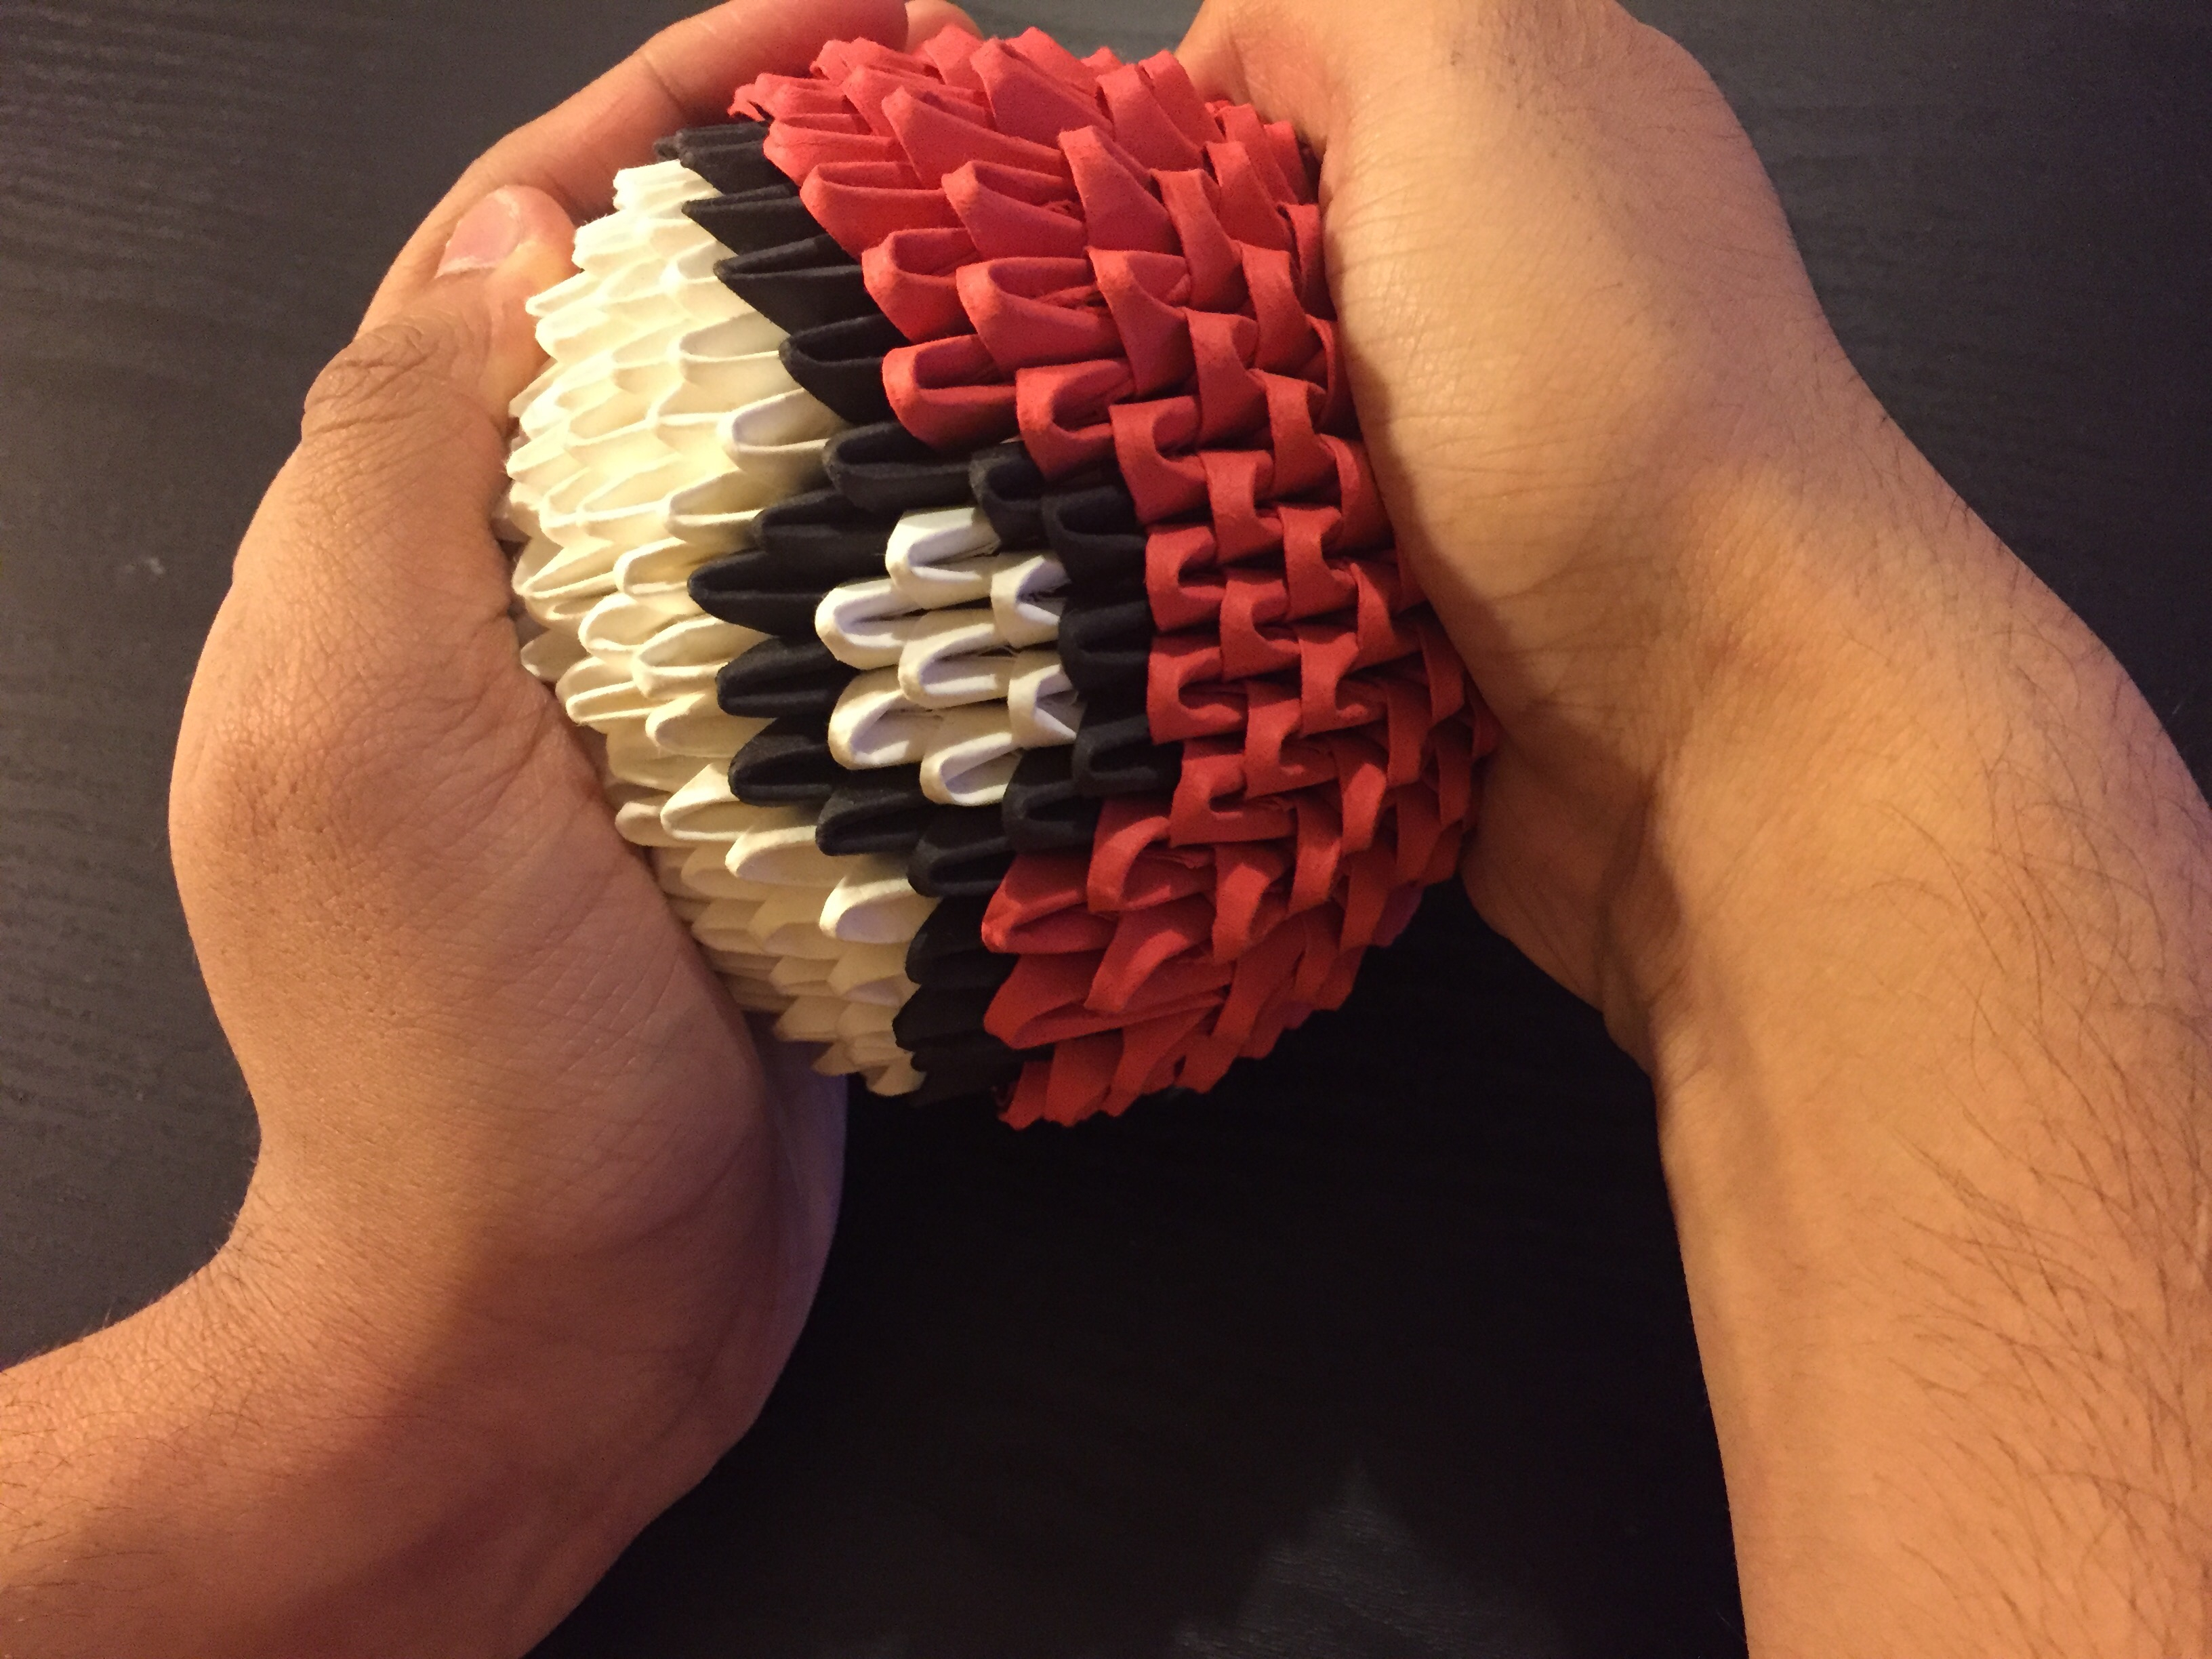 How To Make A Origami Pokeball That Opens 12 3d Origami Repeating Patterns